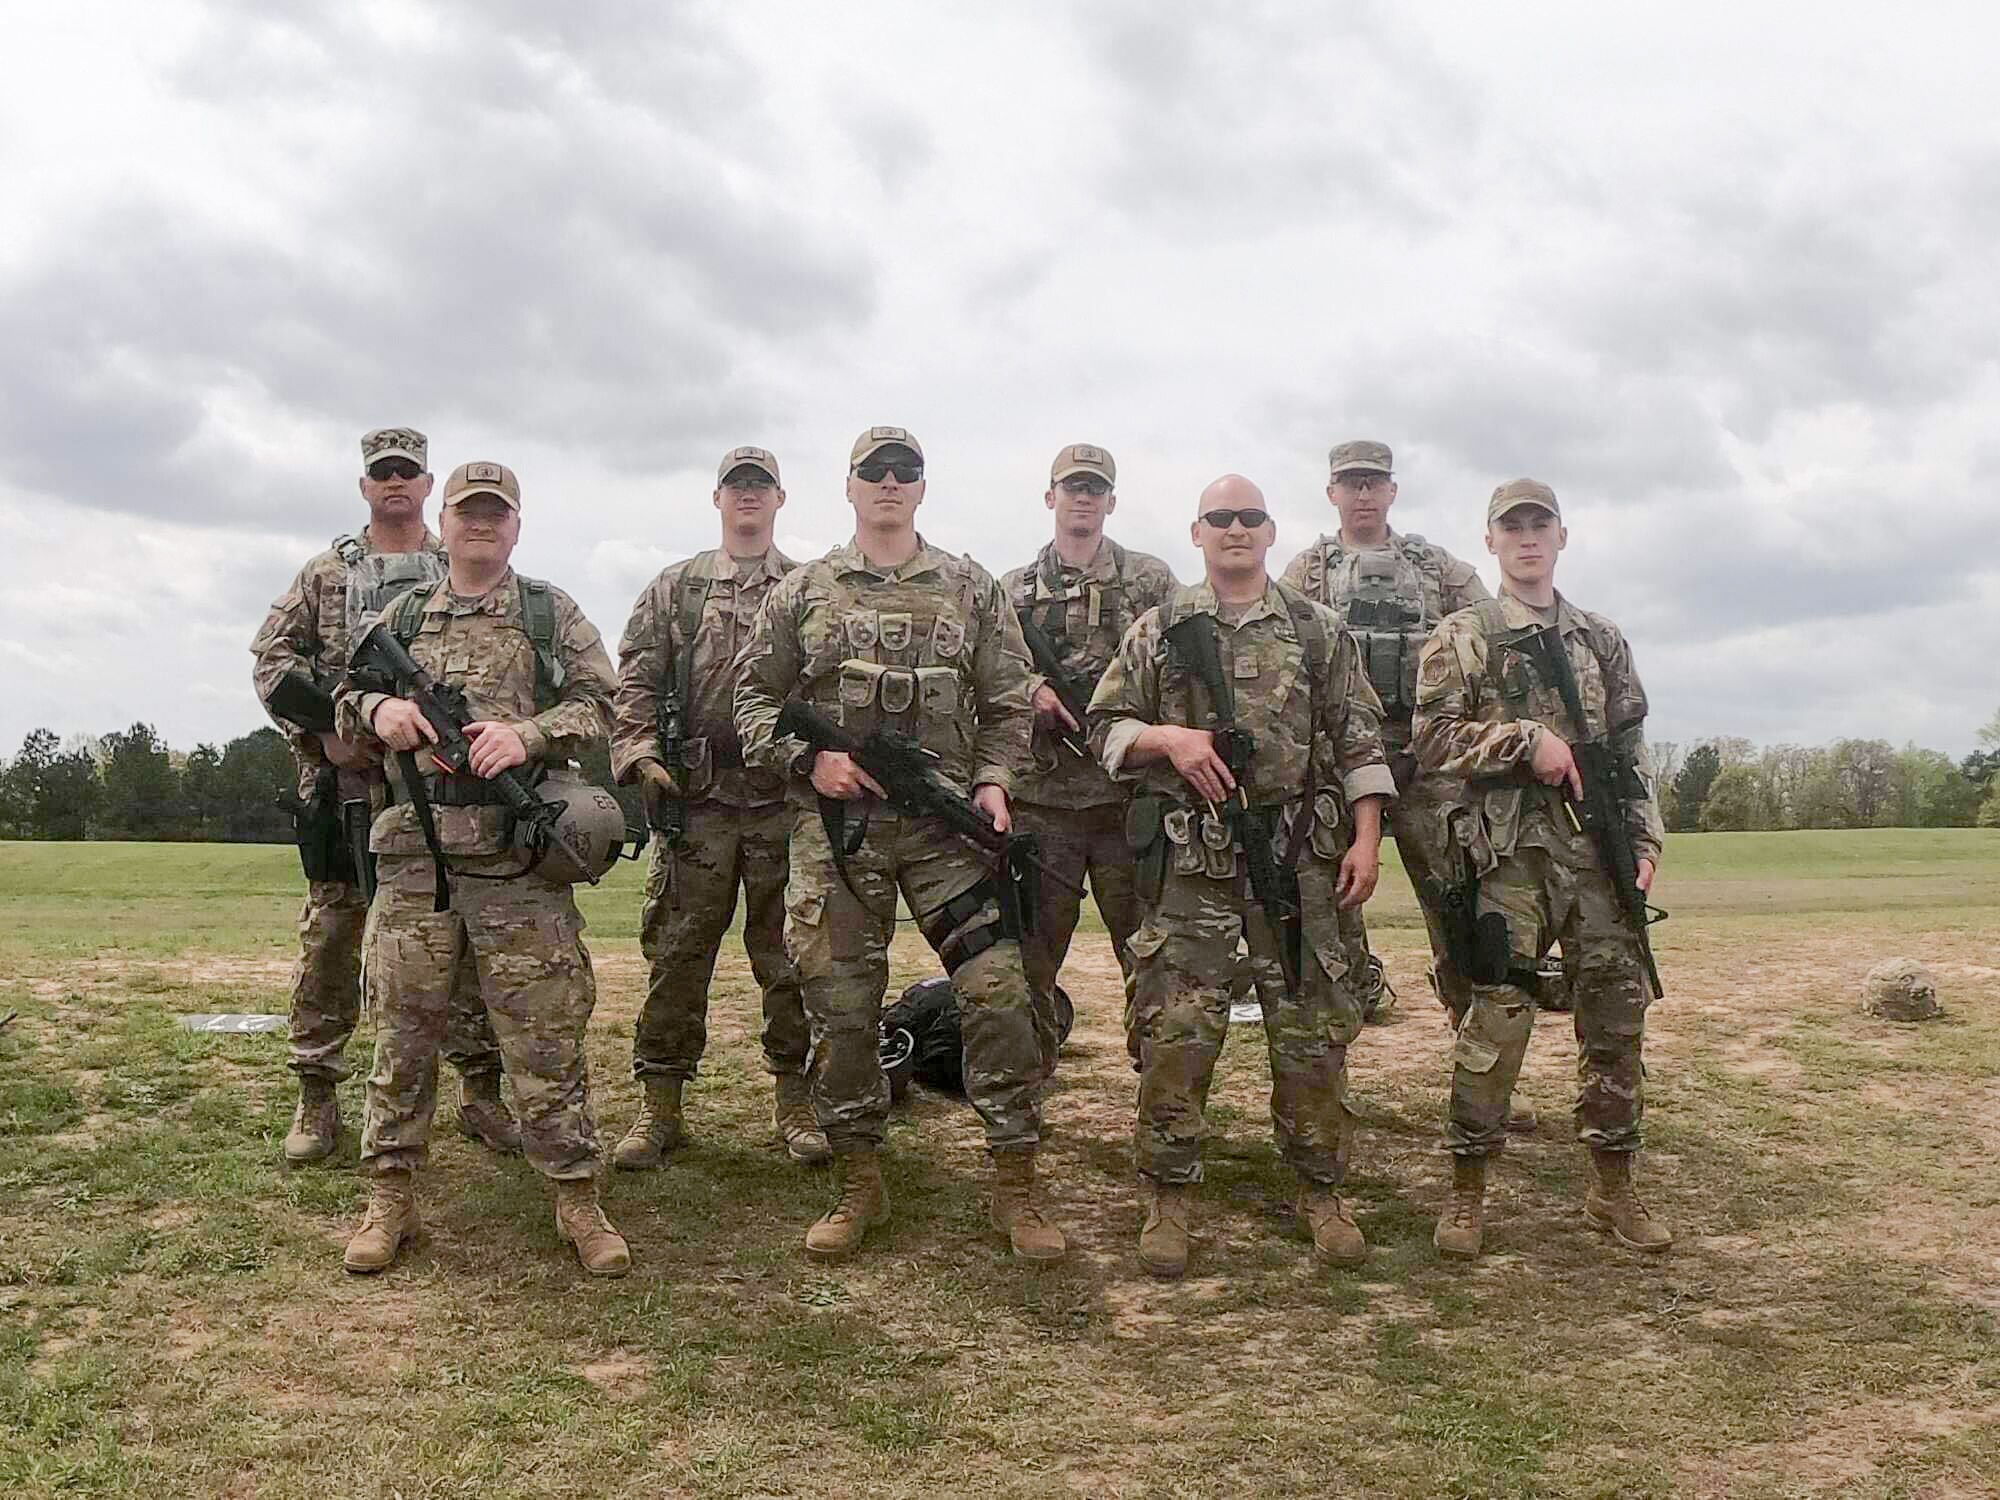 Members of the Washington Air National Guard's marksmanship team pose for a team picture during the 2019 Winston P. Wilson Championship at the Robinson Maneuver Training Center, Arkansas, April 10, 2019.  Pictured in the first row (from left to right) are: Master Sgt. Eric Poe, 225th Support Squadron; Staff Sgt. Shane Key, 225th SS; Master Sgt. Ryan Rathbun, 194th Medical Group; Senior Airman Richard Delinsky 194th Comptroller Flight. 
Second Row: Lt. Col. Richard Gockley, 141st Air Refueling Wing Plans and Programs Office; Tech. Sgt. Cameron Riedl, 225th Air Defense Squadron; Master Sgt. Shay Brockman, 225th ADS; Master Sgt. James Achen, 141st Logistics Readiness Squadron. (Courtesy photo by Staff Sgt. Shane Key).